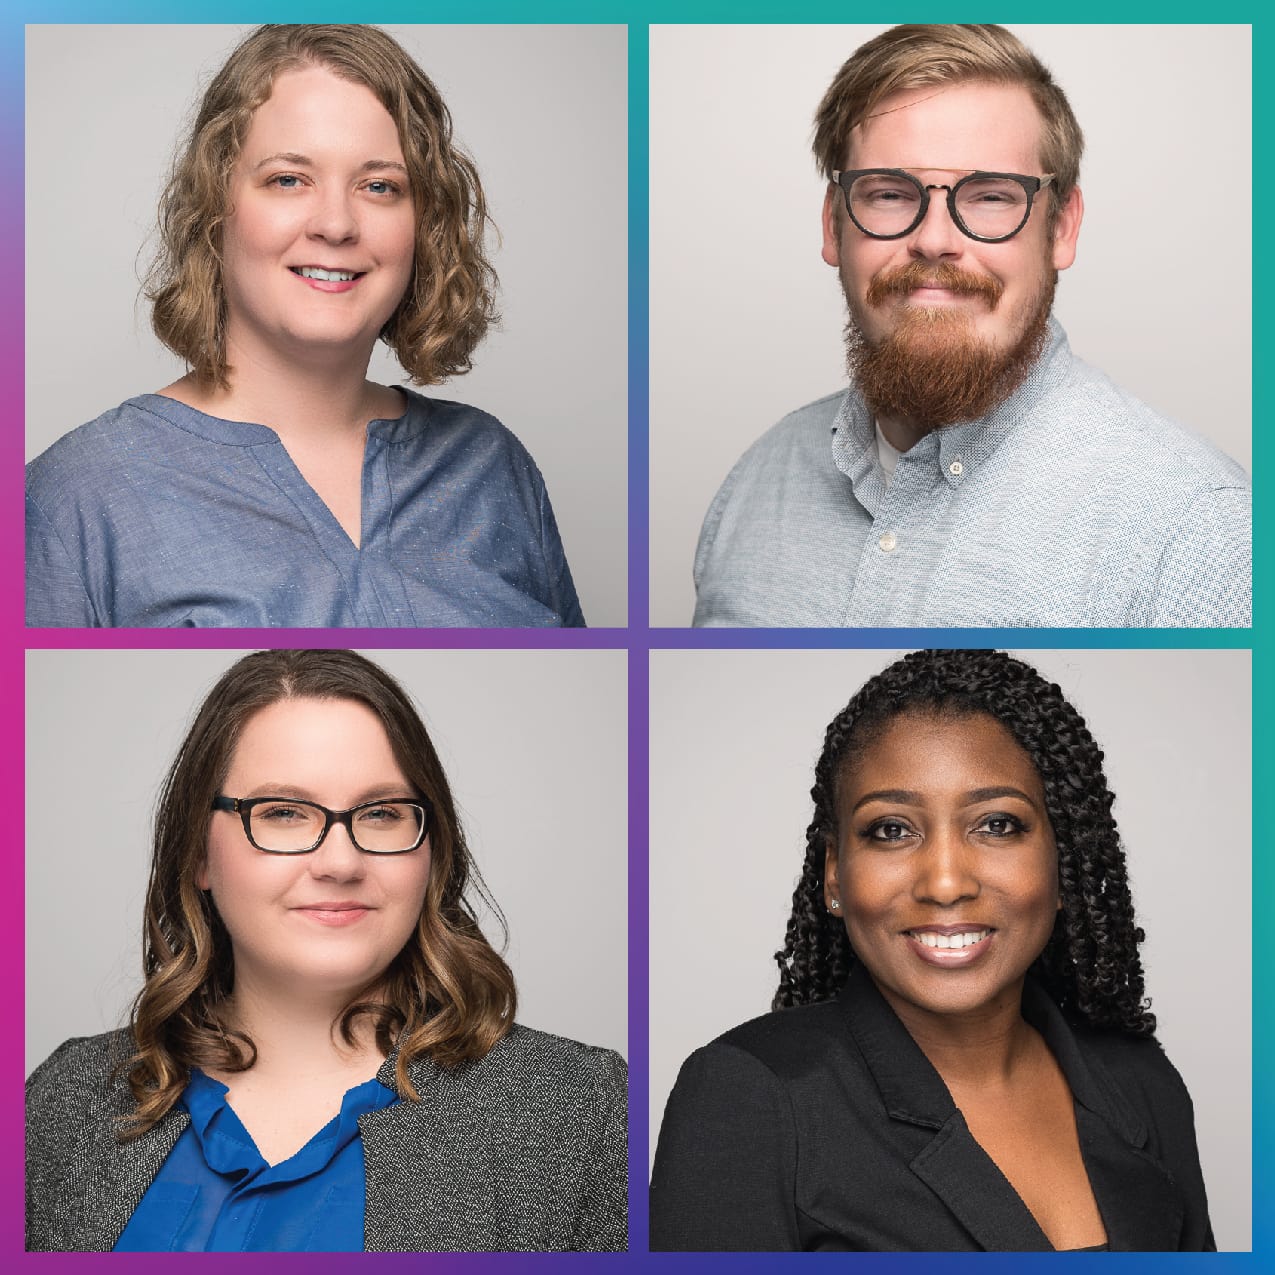 Four New Employees Added to the H+C Team